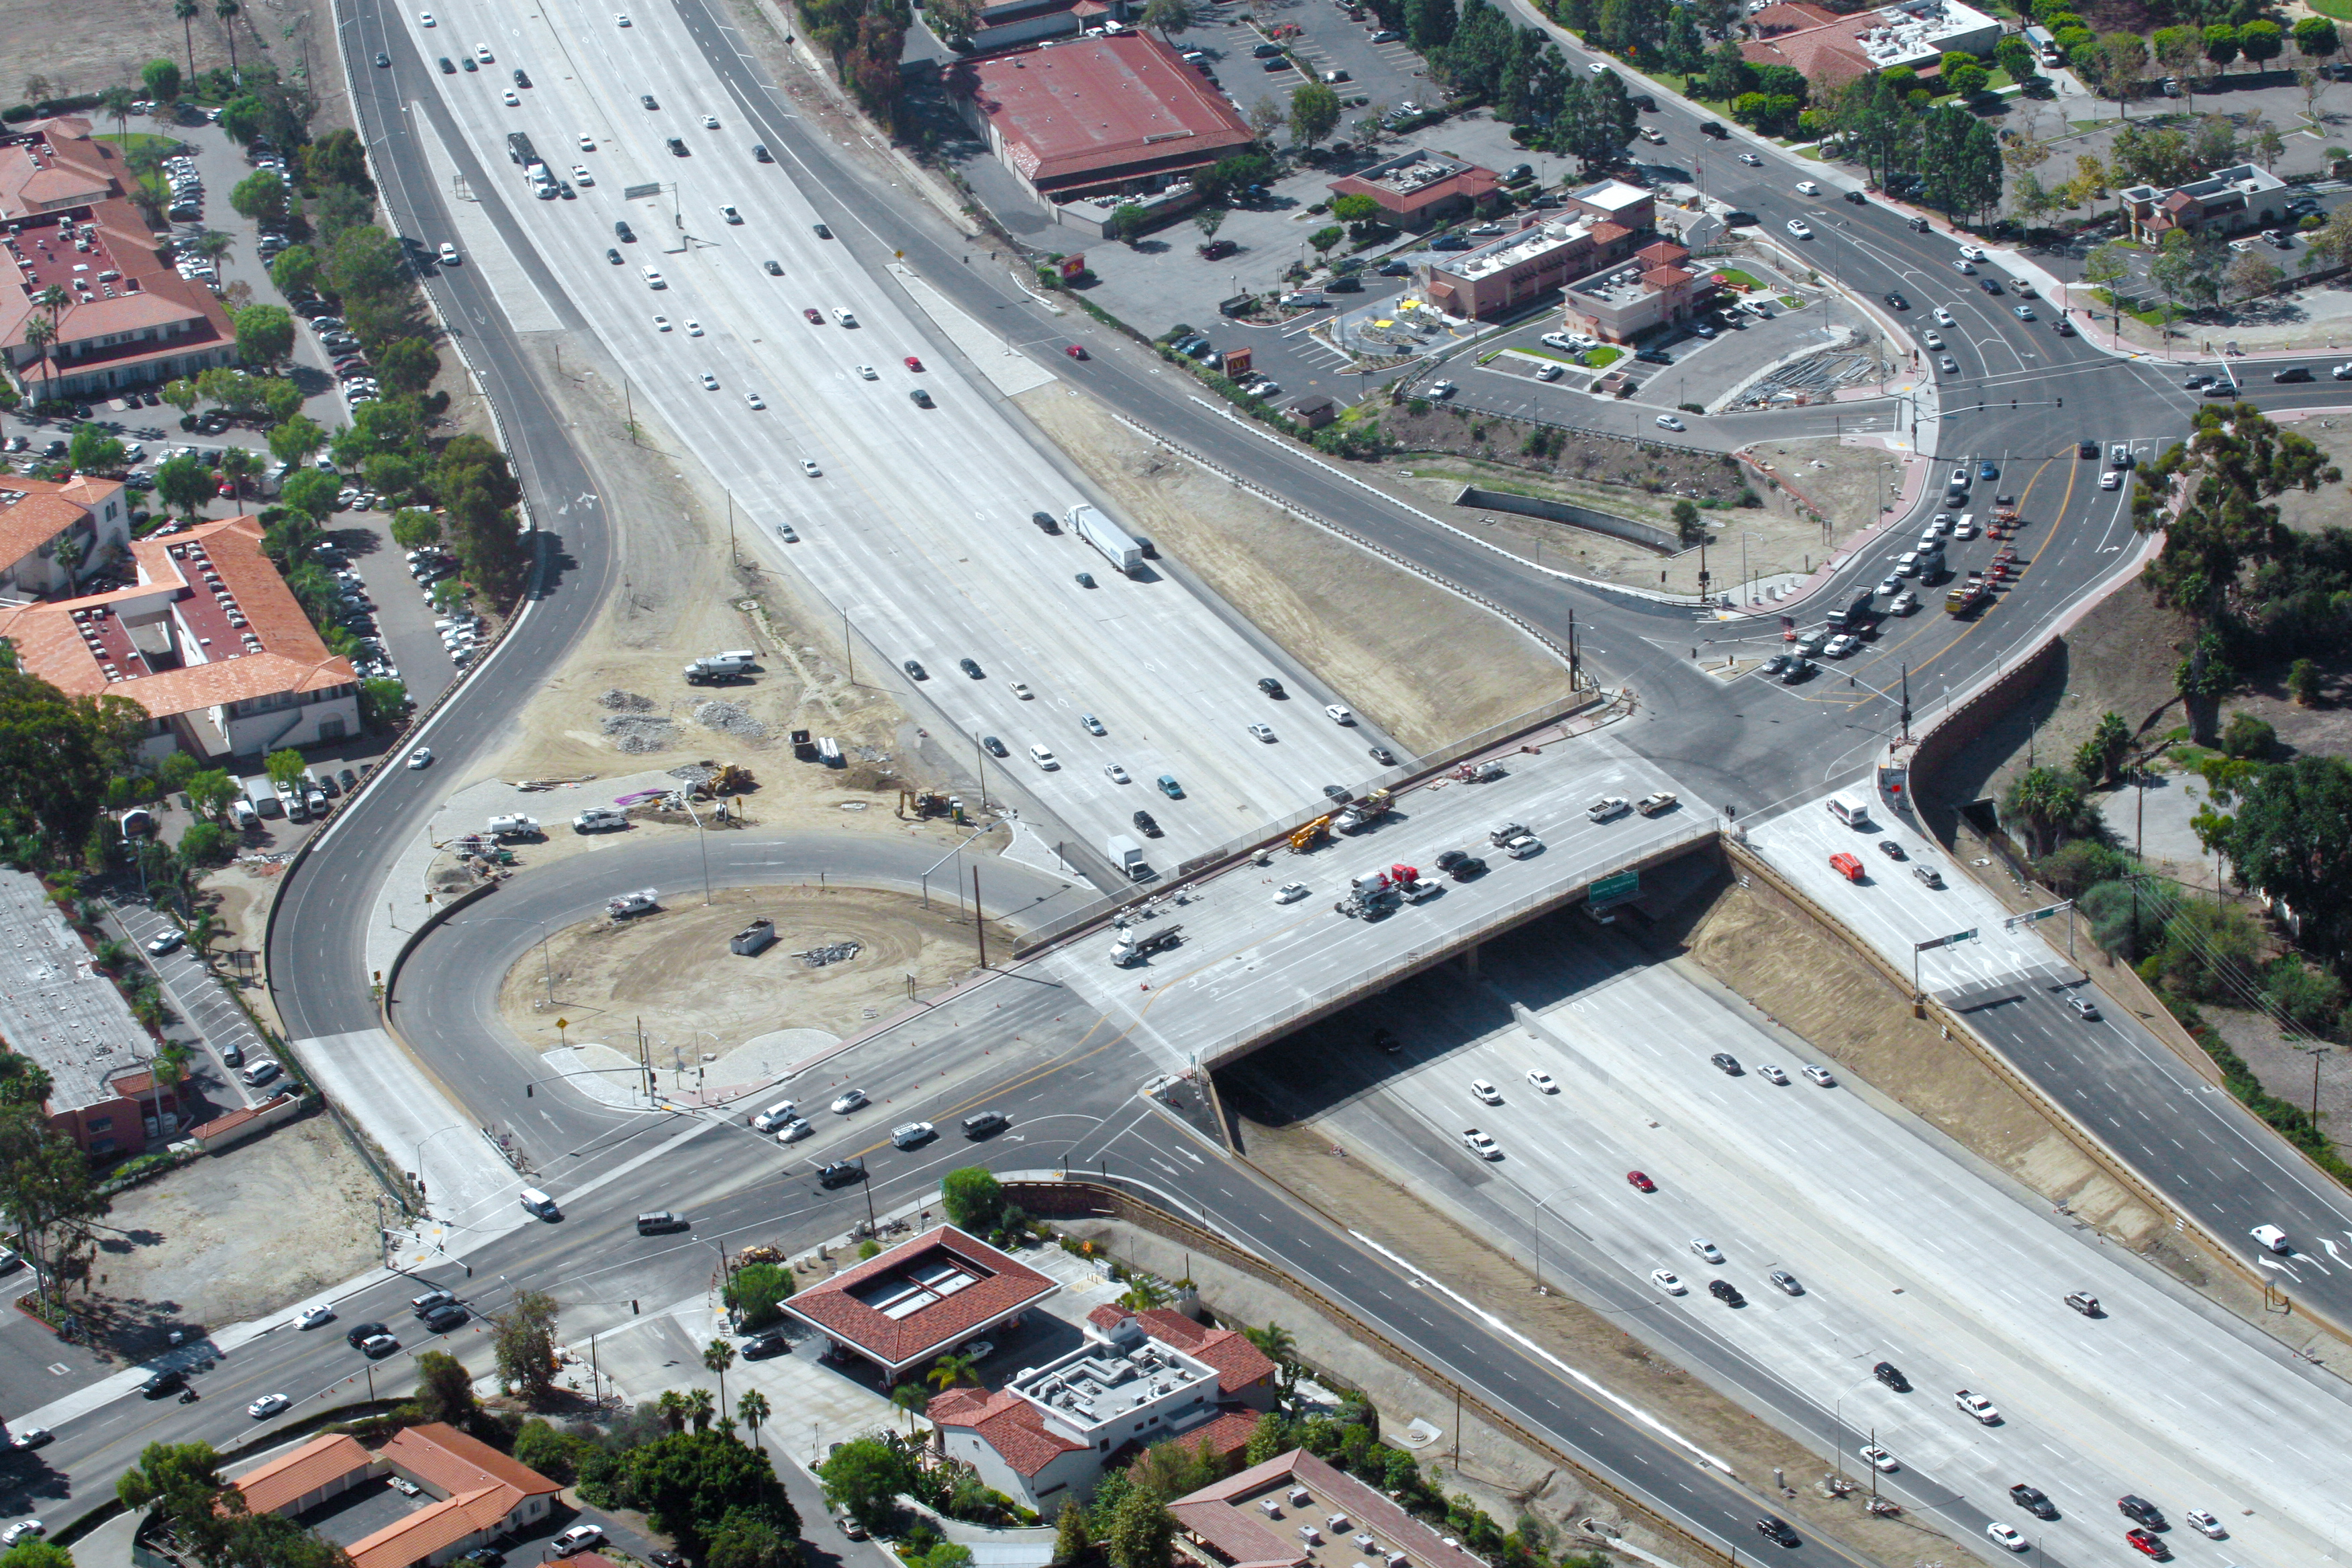 Project O - Freeway Arterial/Streets Transitions (FAST)